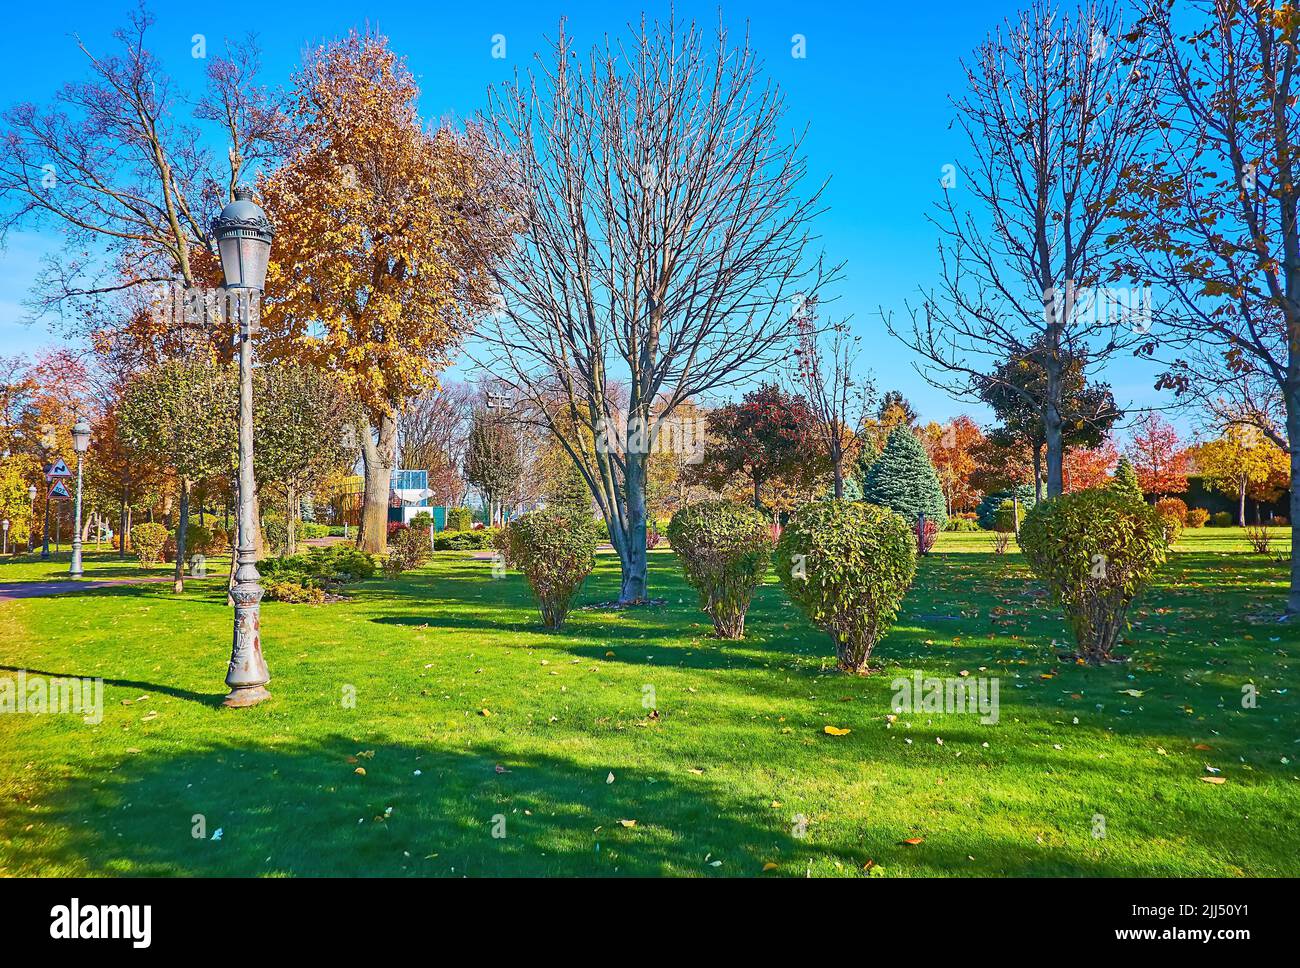 The picturesque autumn park with yellow trees, trimmed shrubs and green lawn, Mezhyhirya, Ukraine Stock Photo